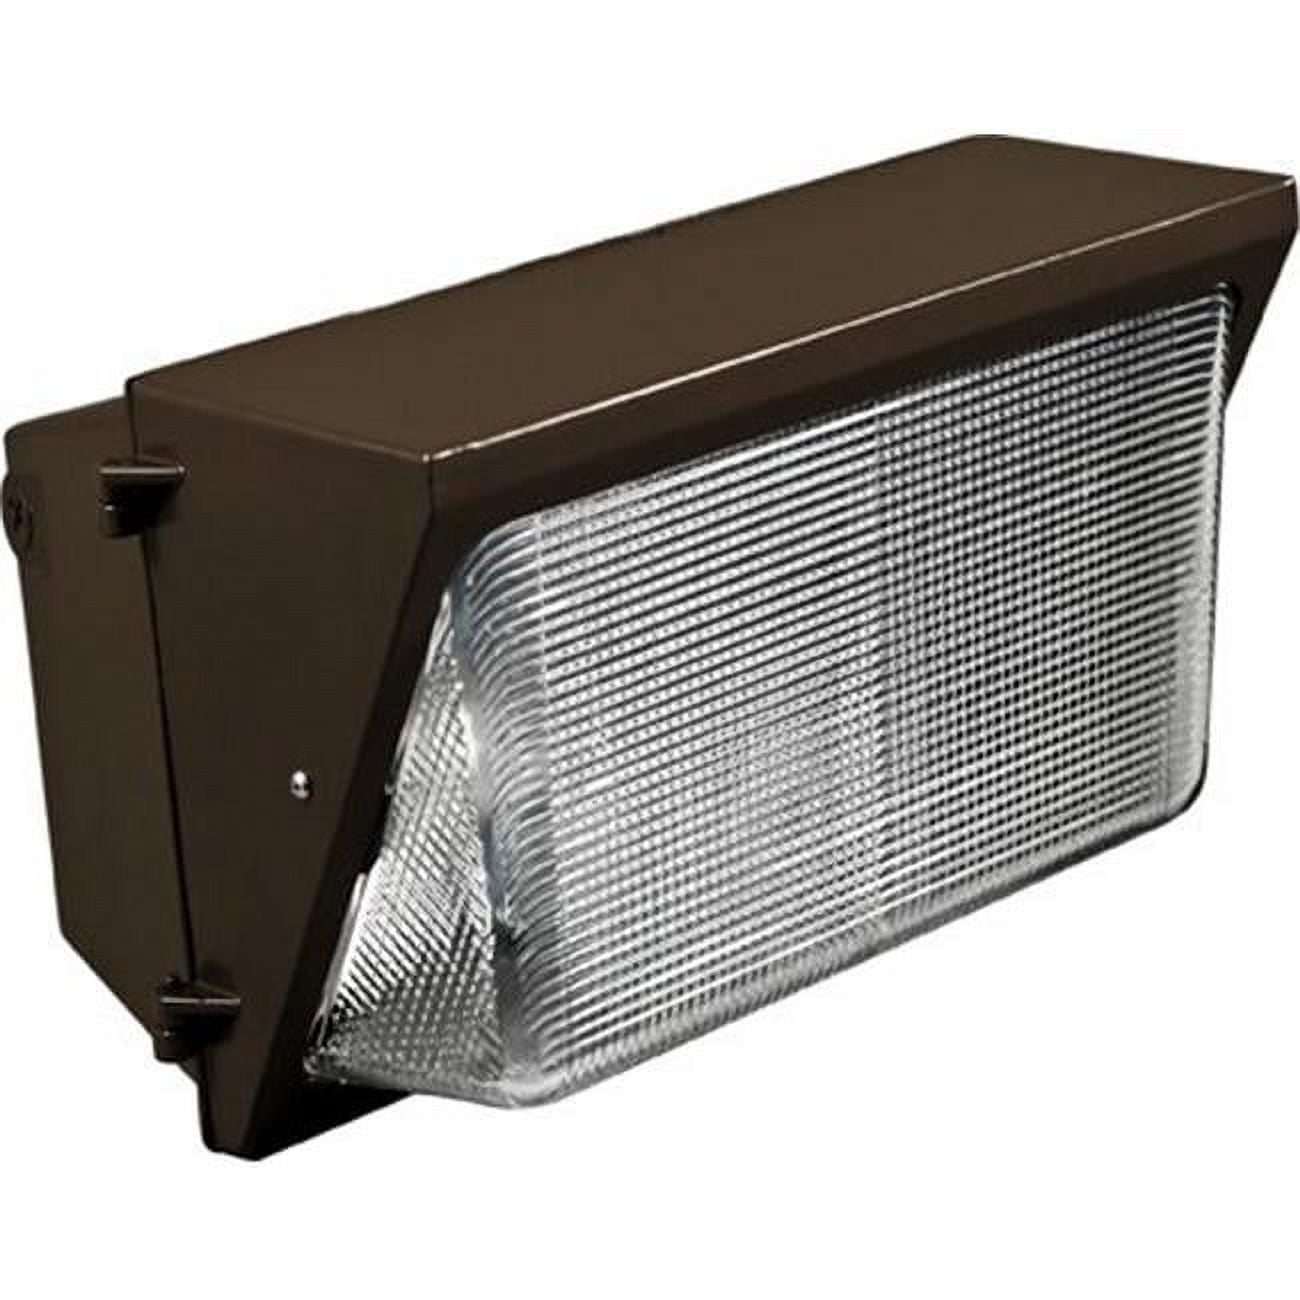 Dw1840-mt 13.38 X 18 X 9 In. 400 Watts Large Wall Pack Fixture With Metal Halide Lamp, Bronze